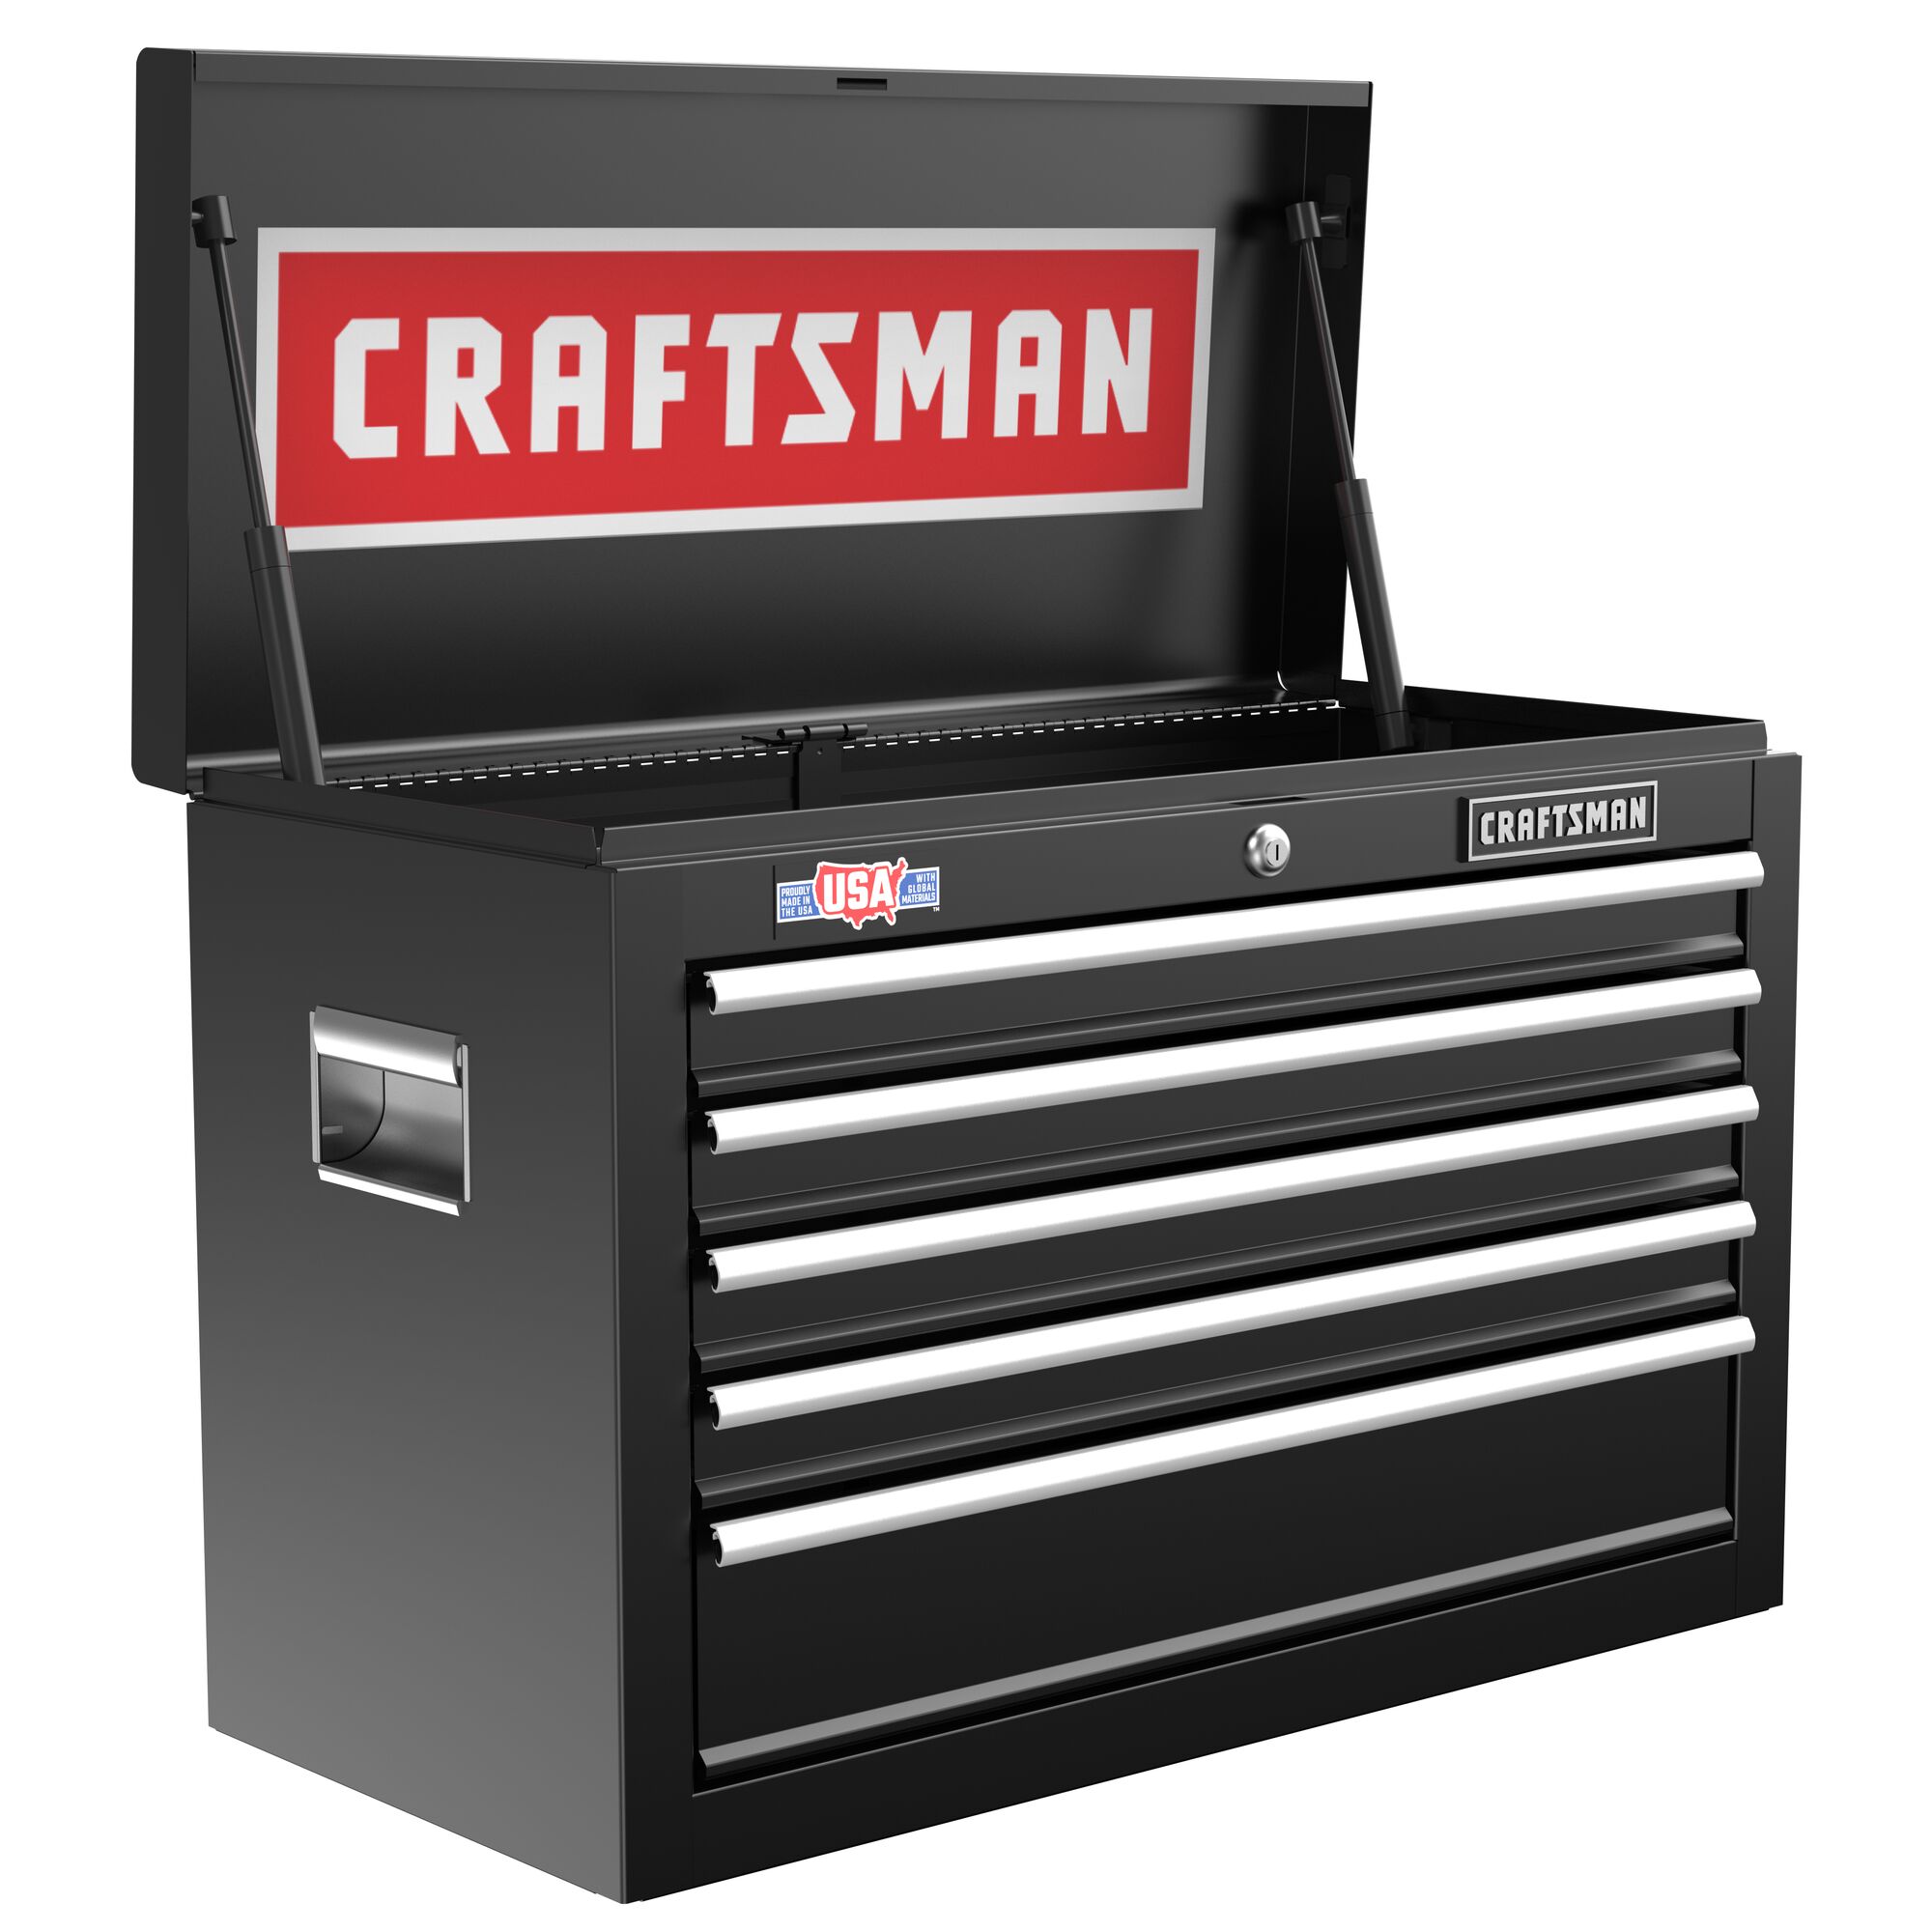 CRAFTSMAN 5 drawer chest showing 5 drawers and 3,589 cu. in. of storage space